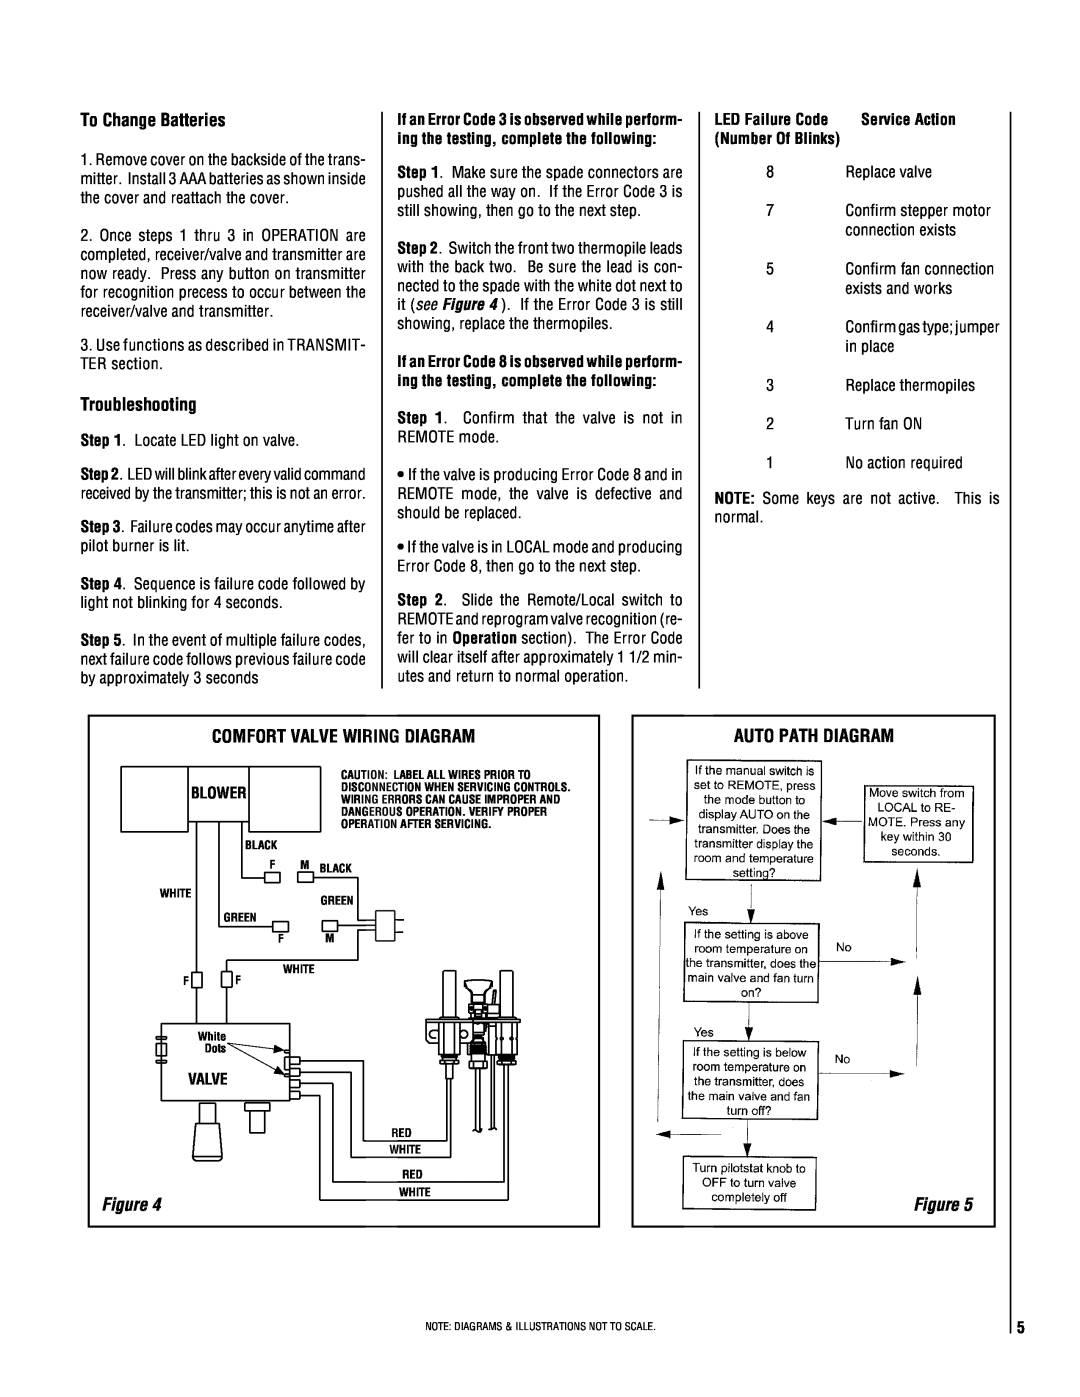 Magnavox LSS-40CP To Change Batteries, Troubleshooting, Comfort Valve Wiring Diagram, Auto Path Diagram, LED Failure Code 